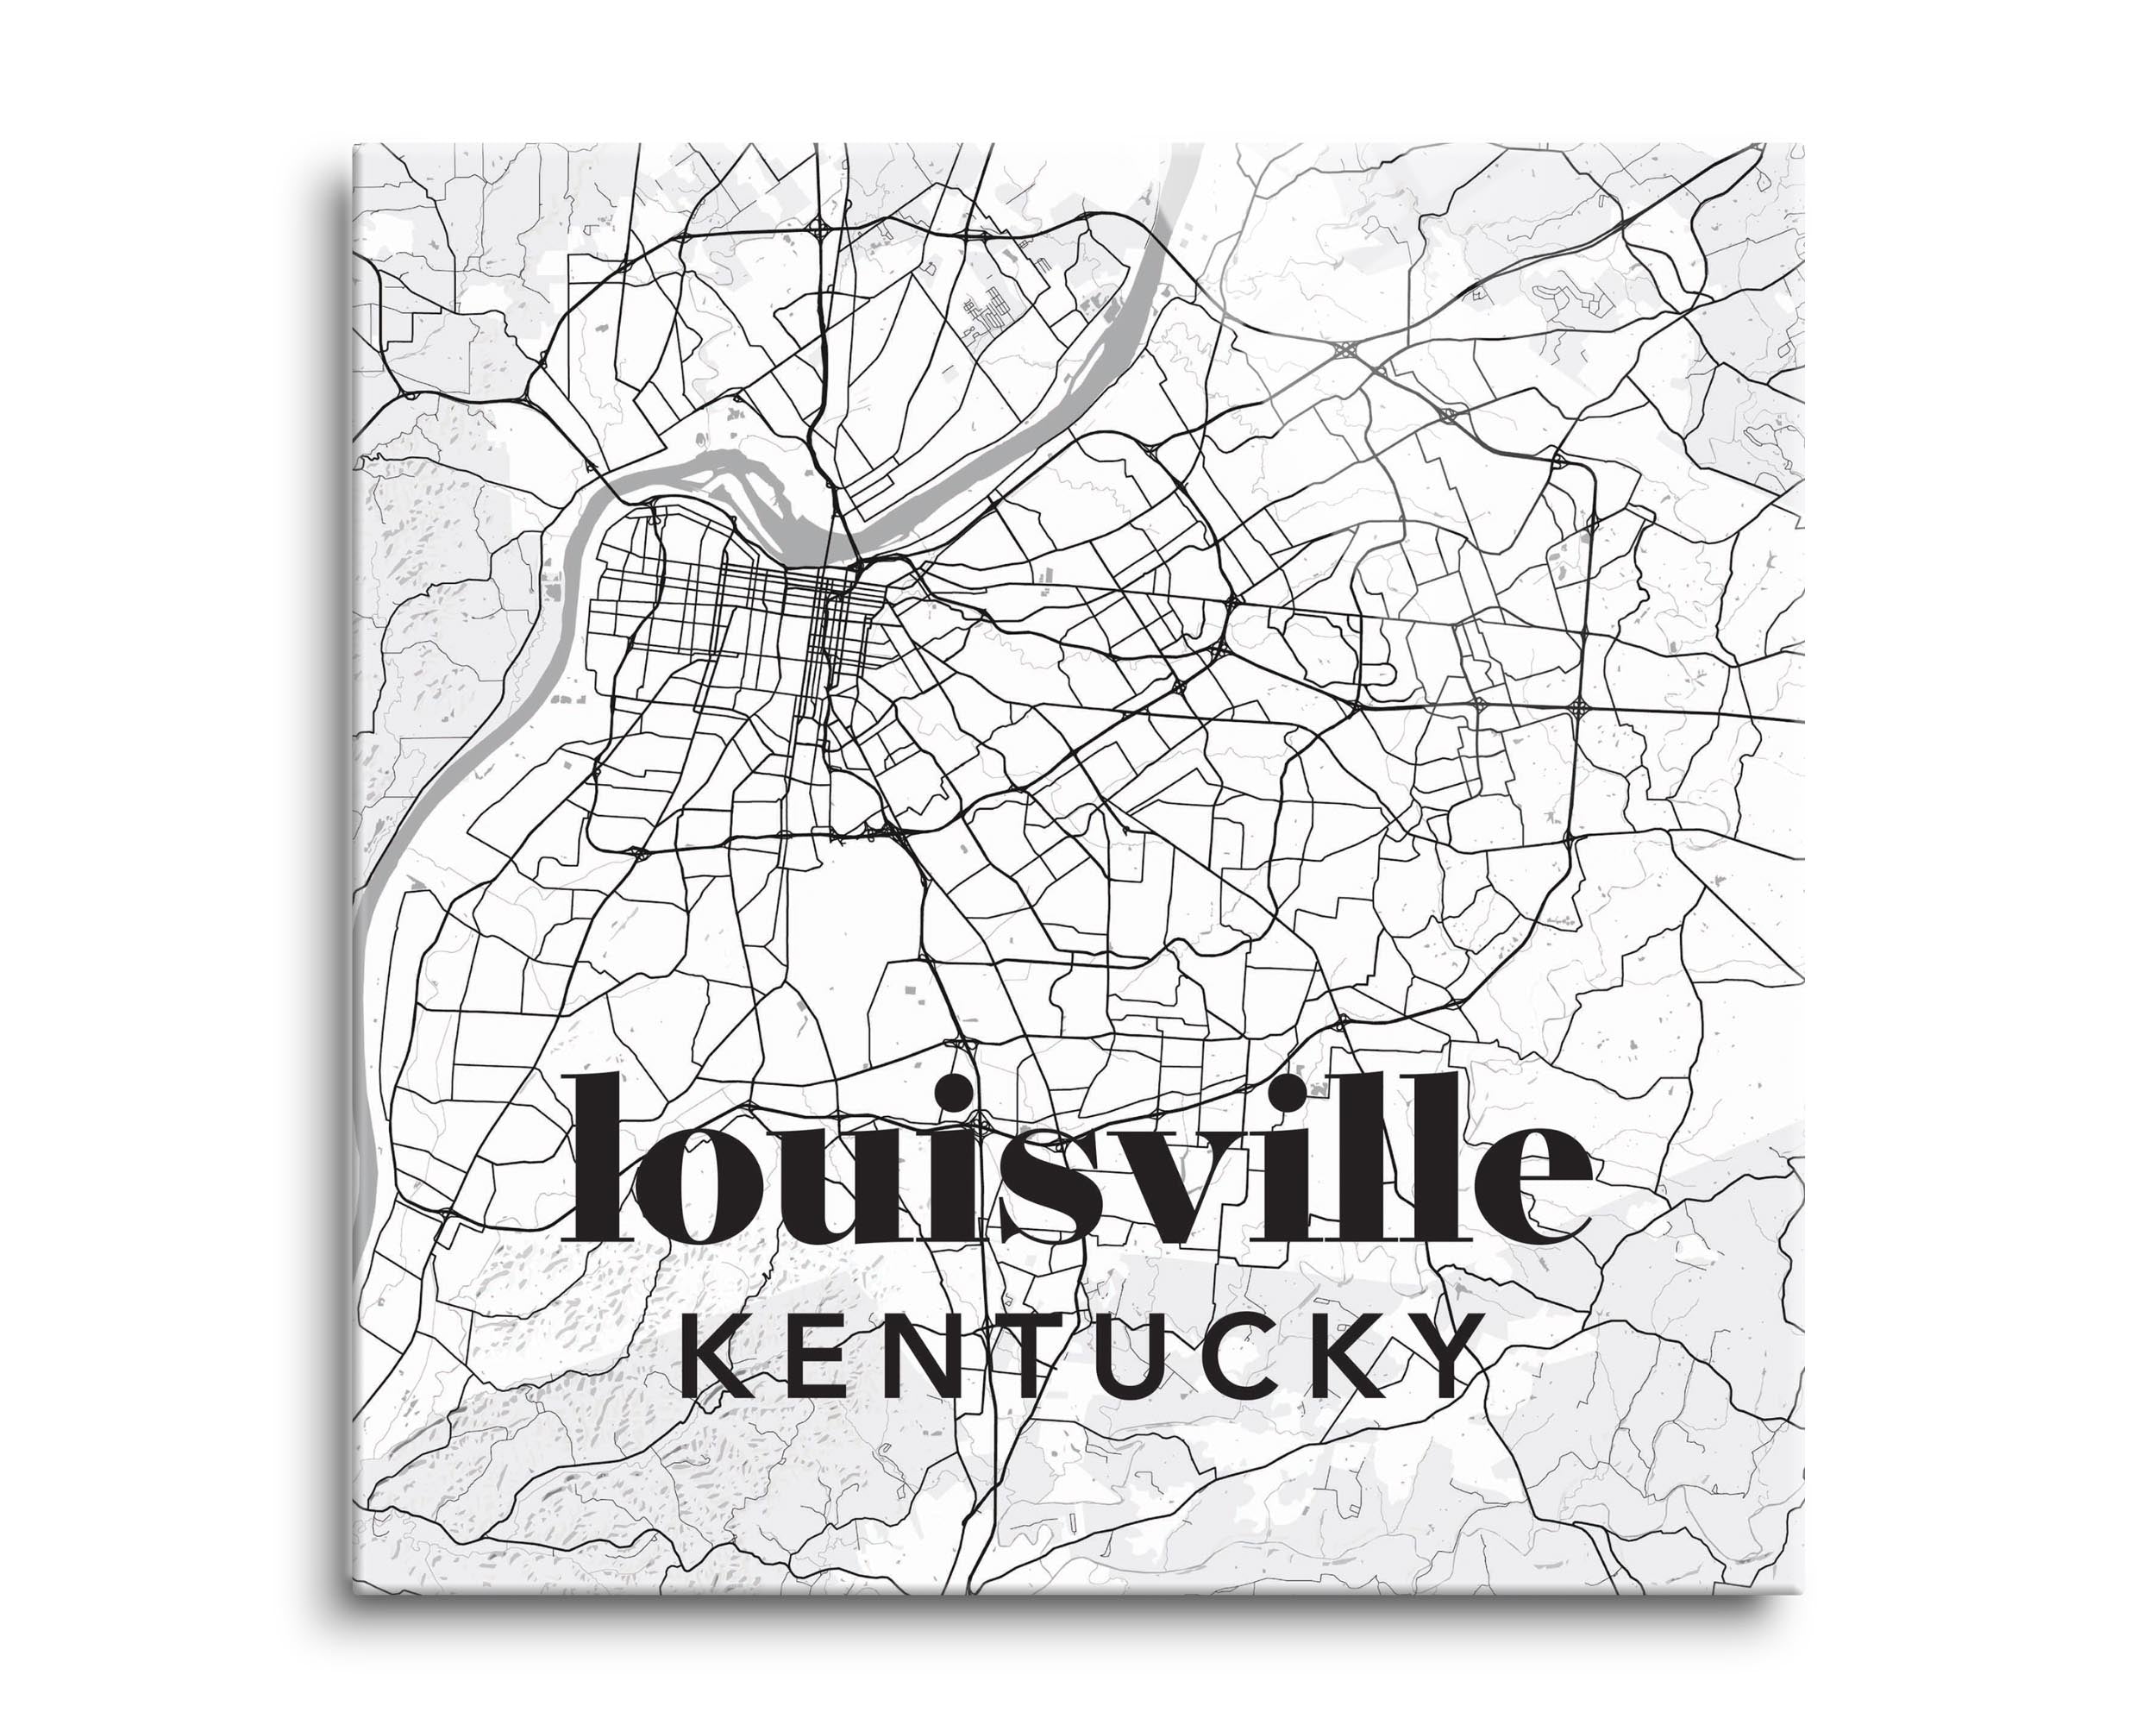 Louisville Kentucky City Map Black and White Street Series Canvas